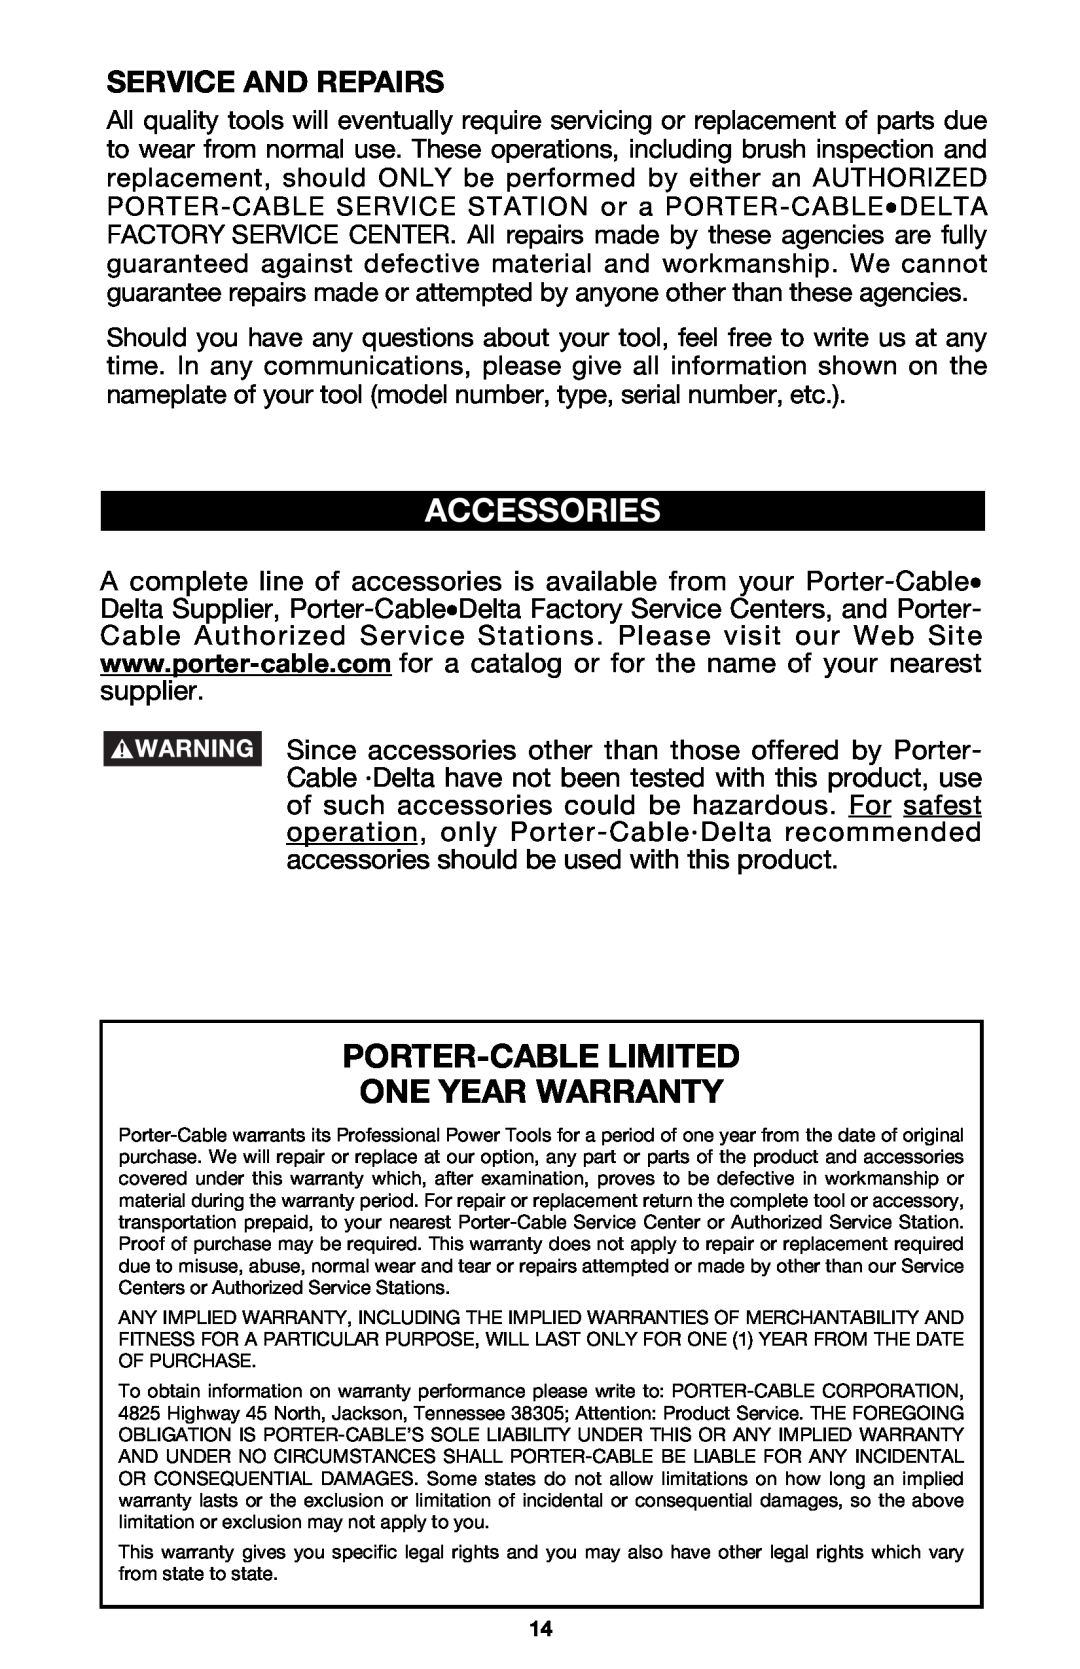 Porter-Cable 423MAG, 424MAG instruction manual Accessories, Porter-Cablelimited One Year Warranty, Service And Repairs 